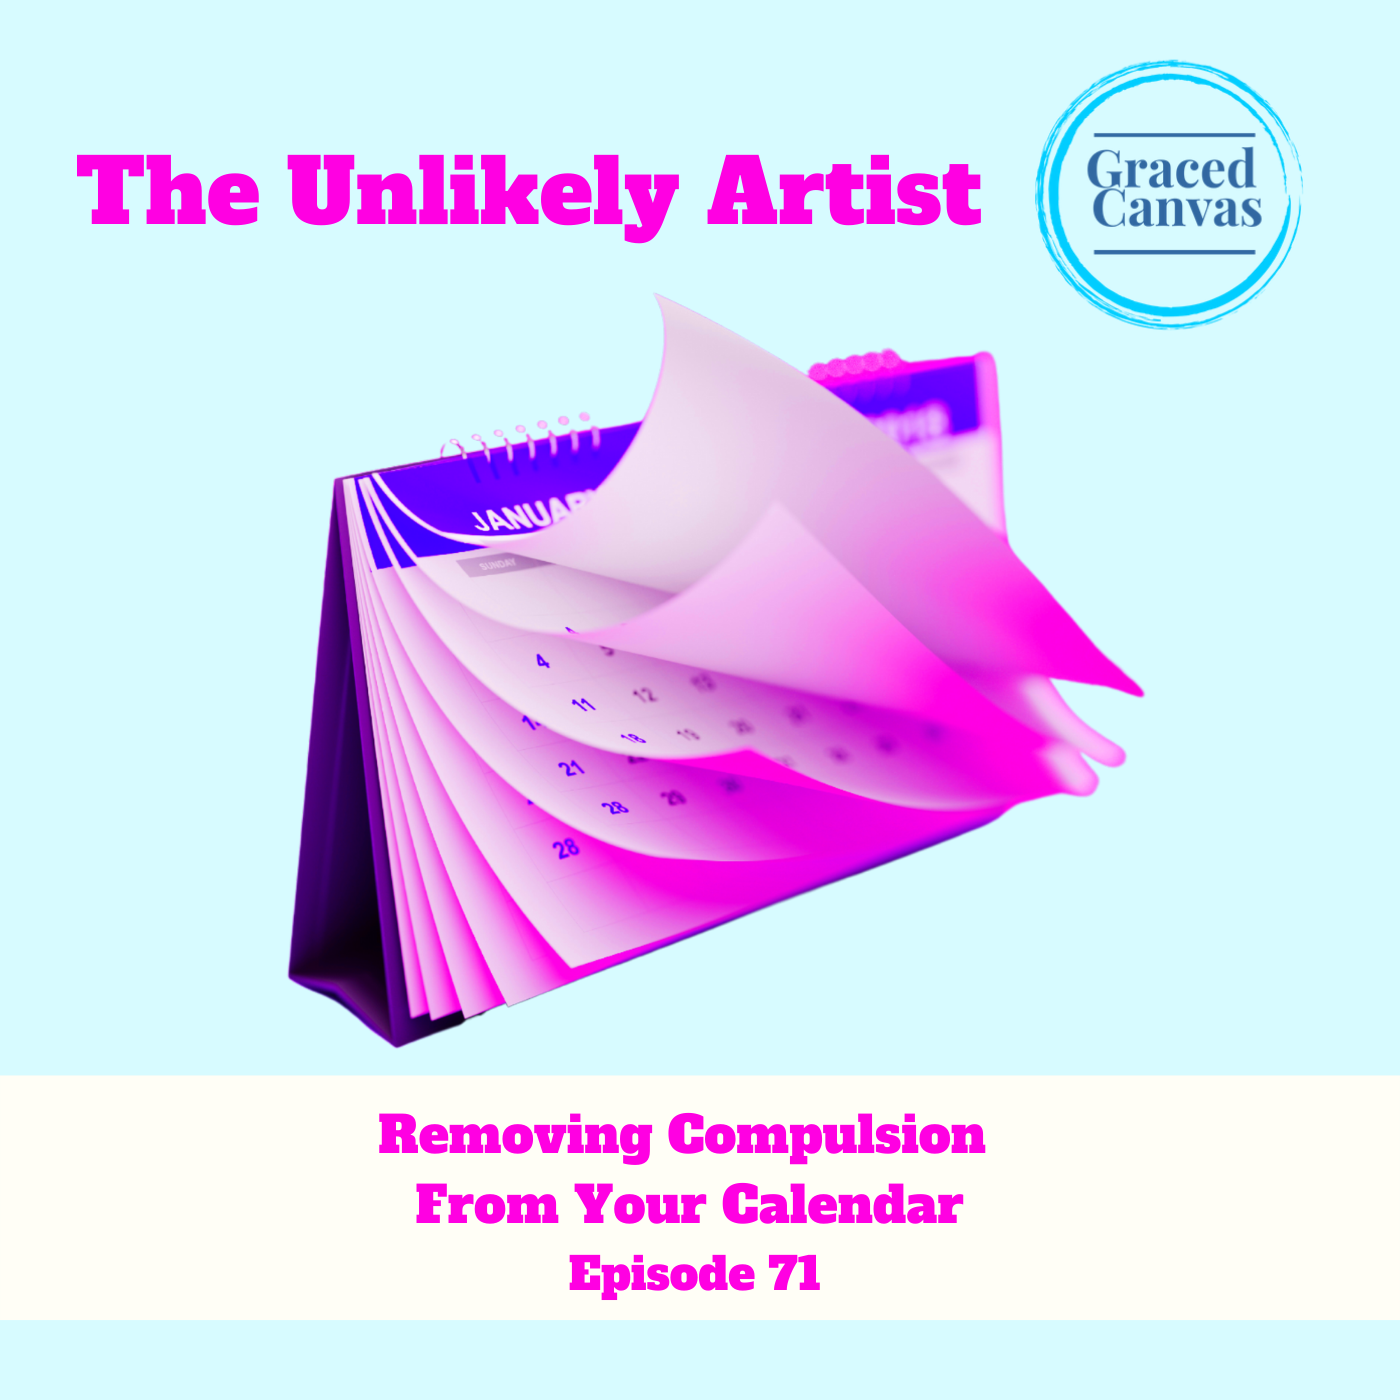 Removing Compulsion From Your Calendar | UA71